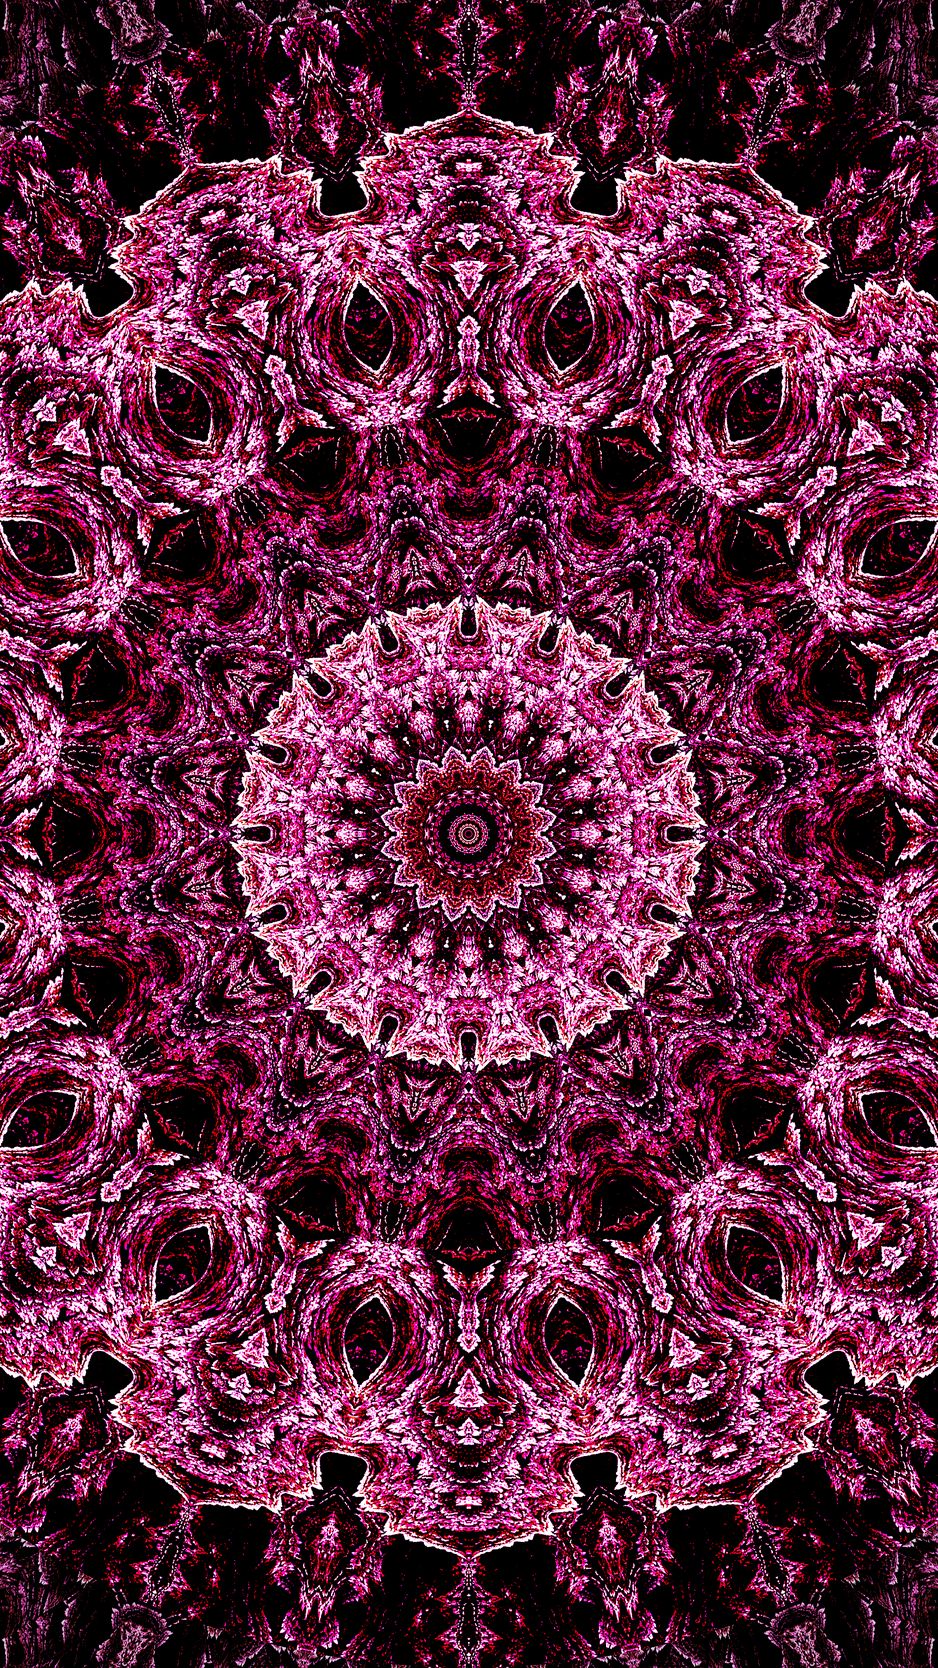 Download wallpaper 938x1668 mandala, pattern, kaleidoscope, abstraction, purple  iphone 8/7/6s/6 for parallax hd background